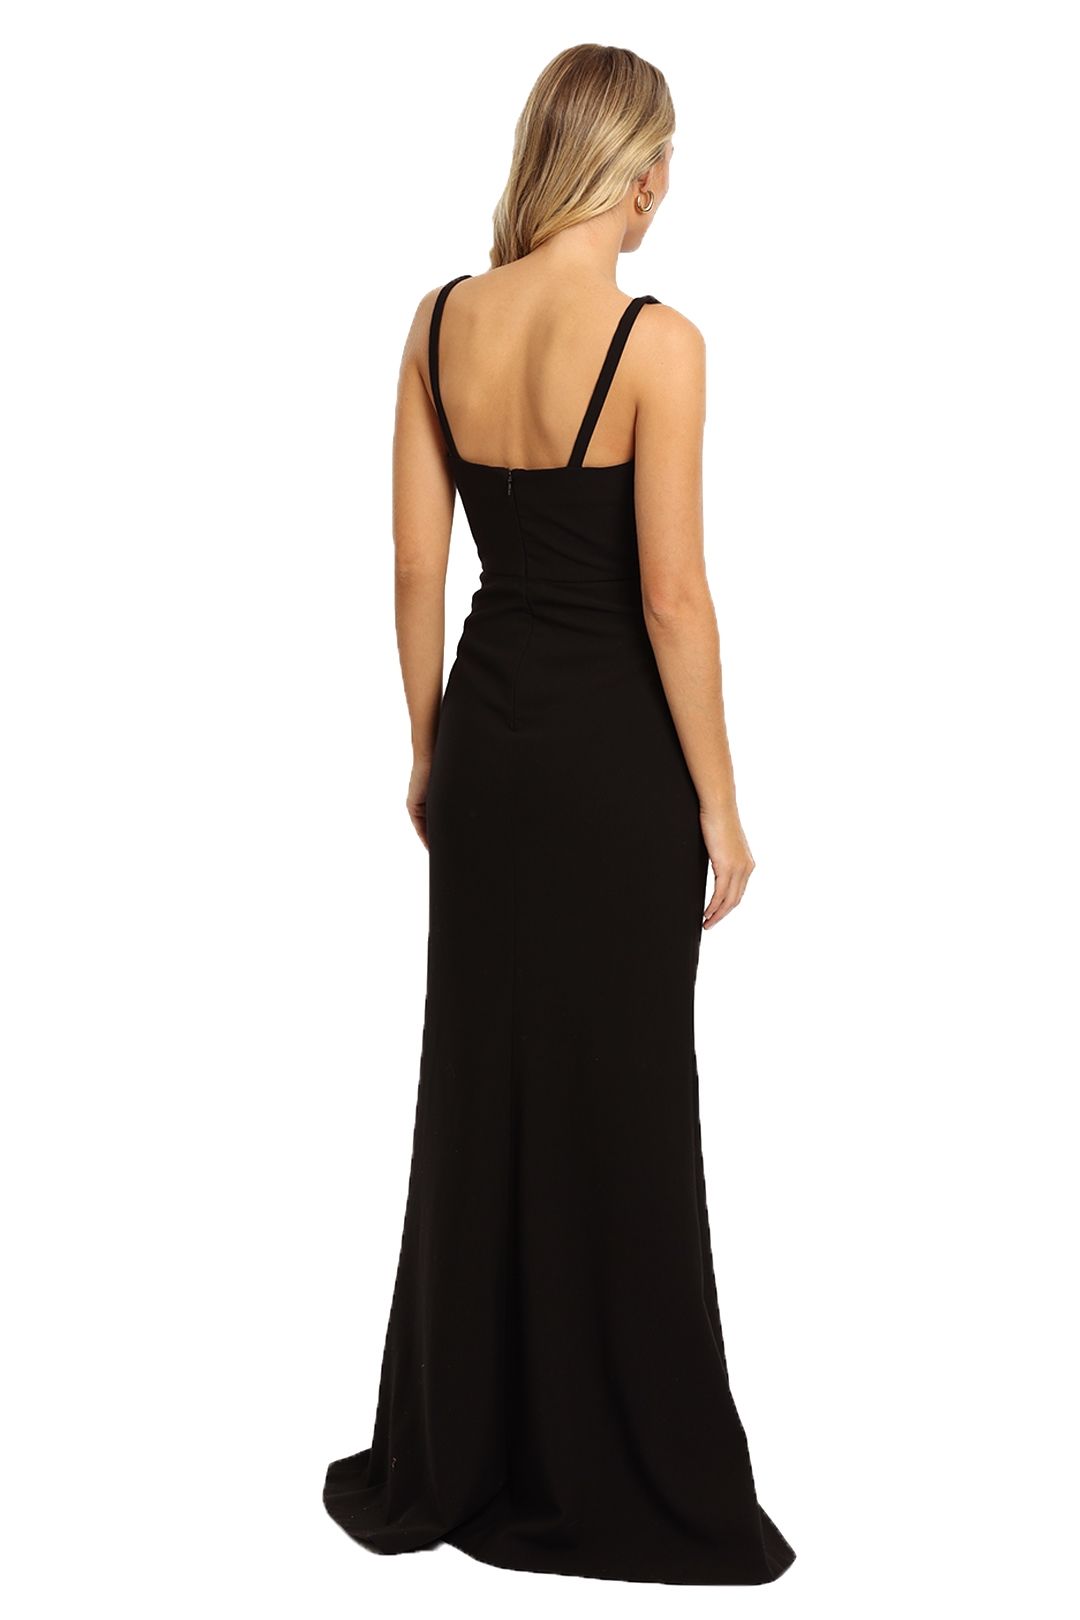 Likely NYC Constance Gown in Black Floor Length